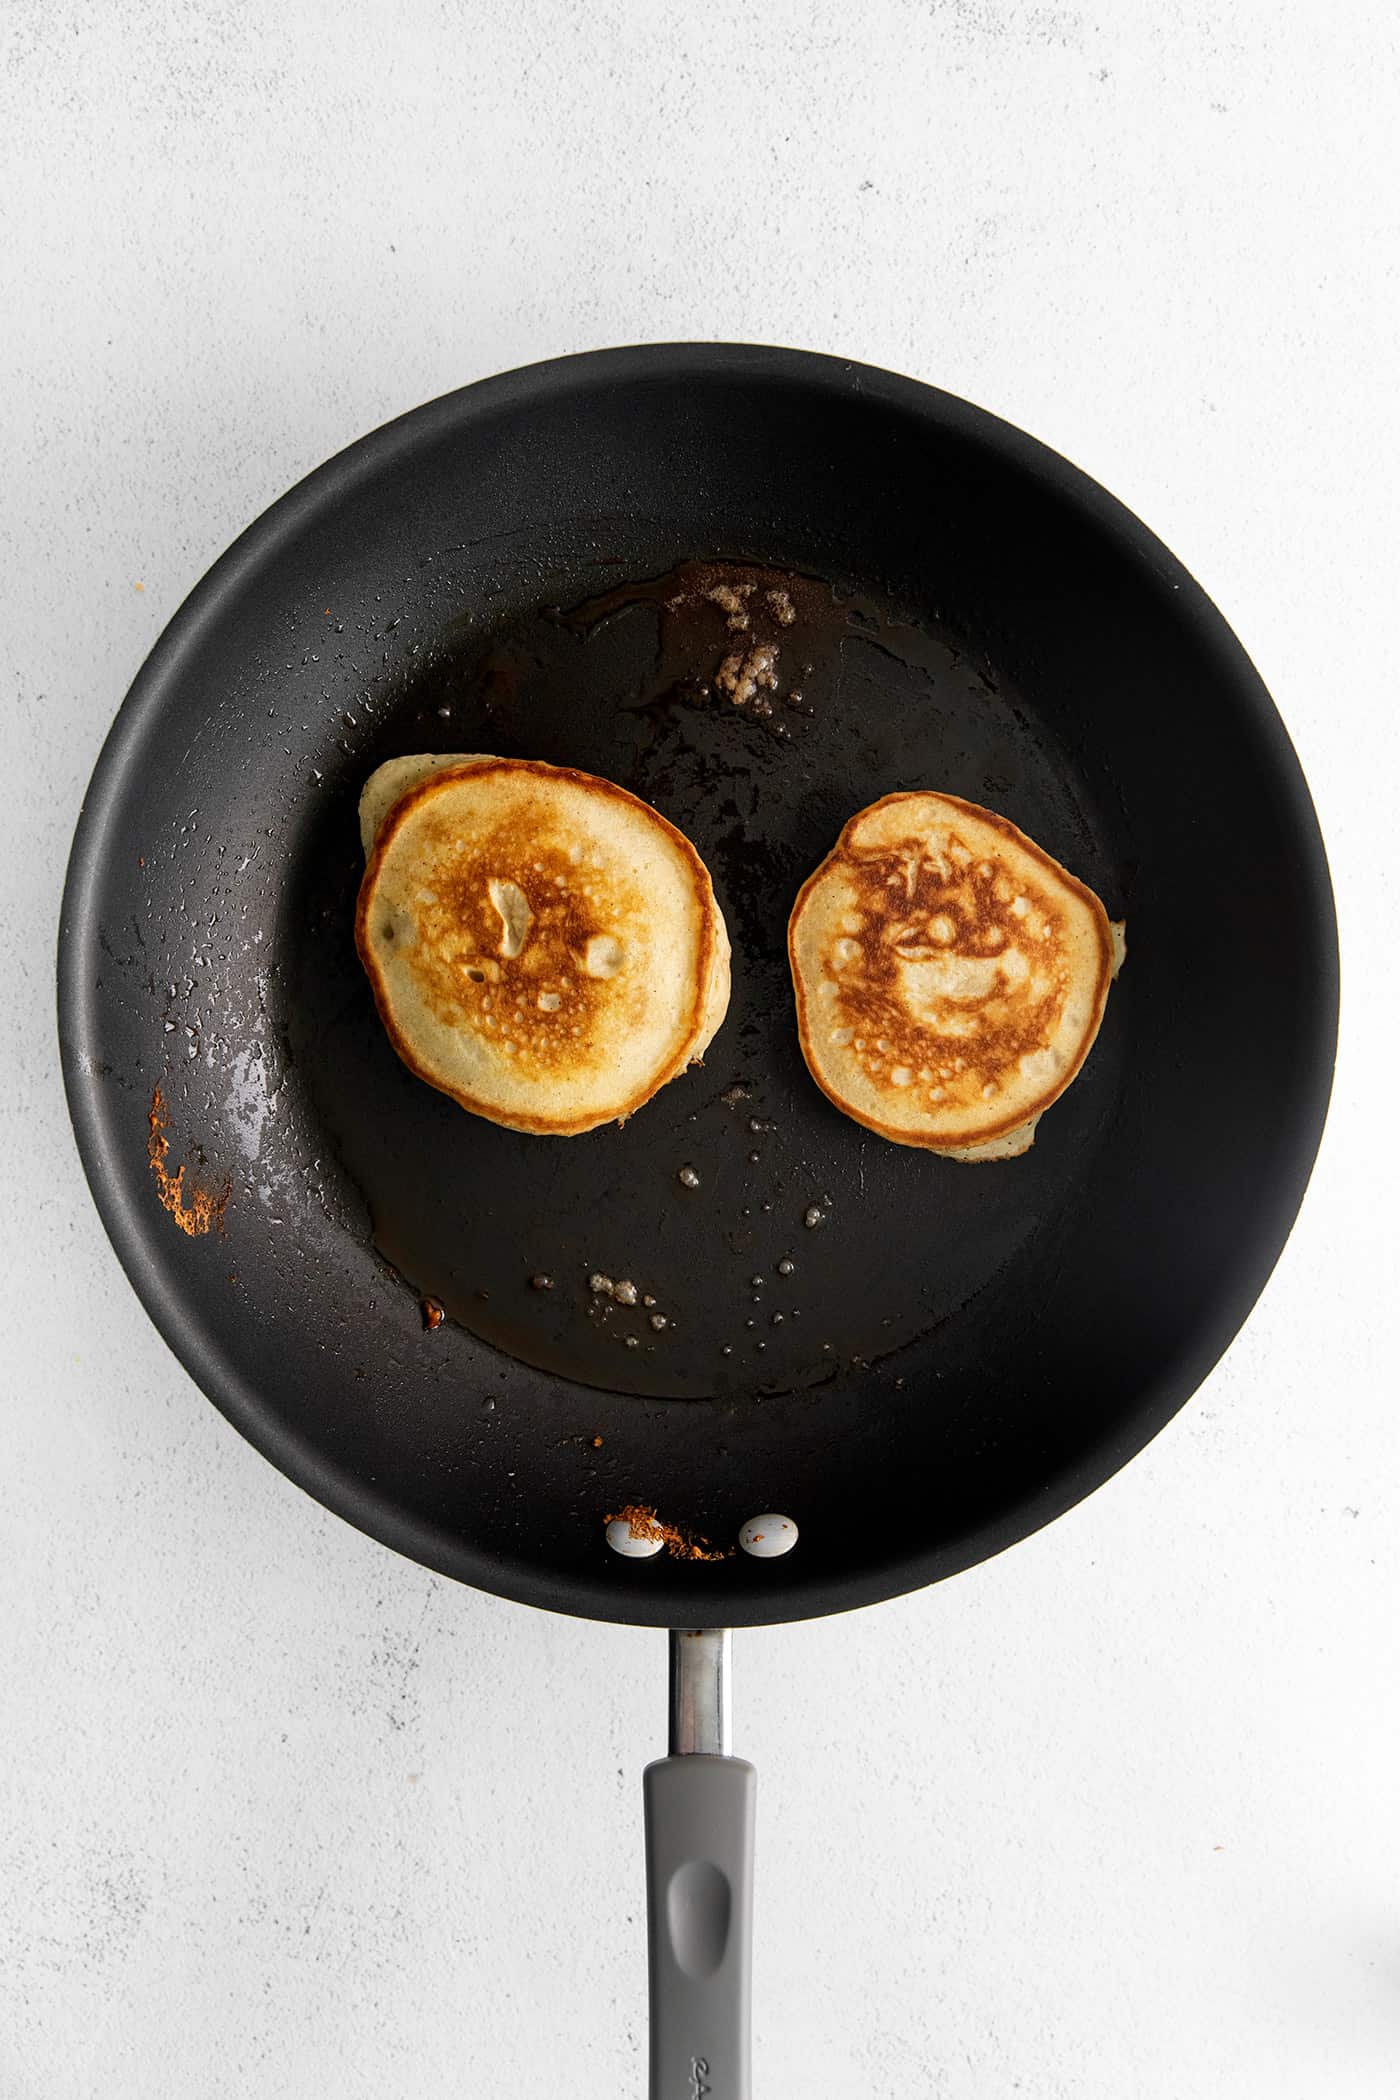 Overhead view of two pancakes in a cast iron skillet